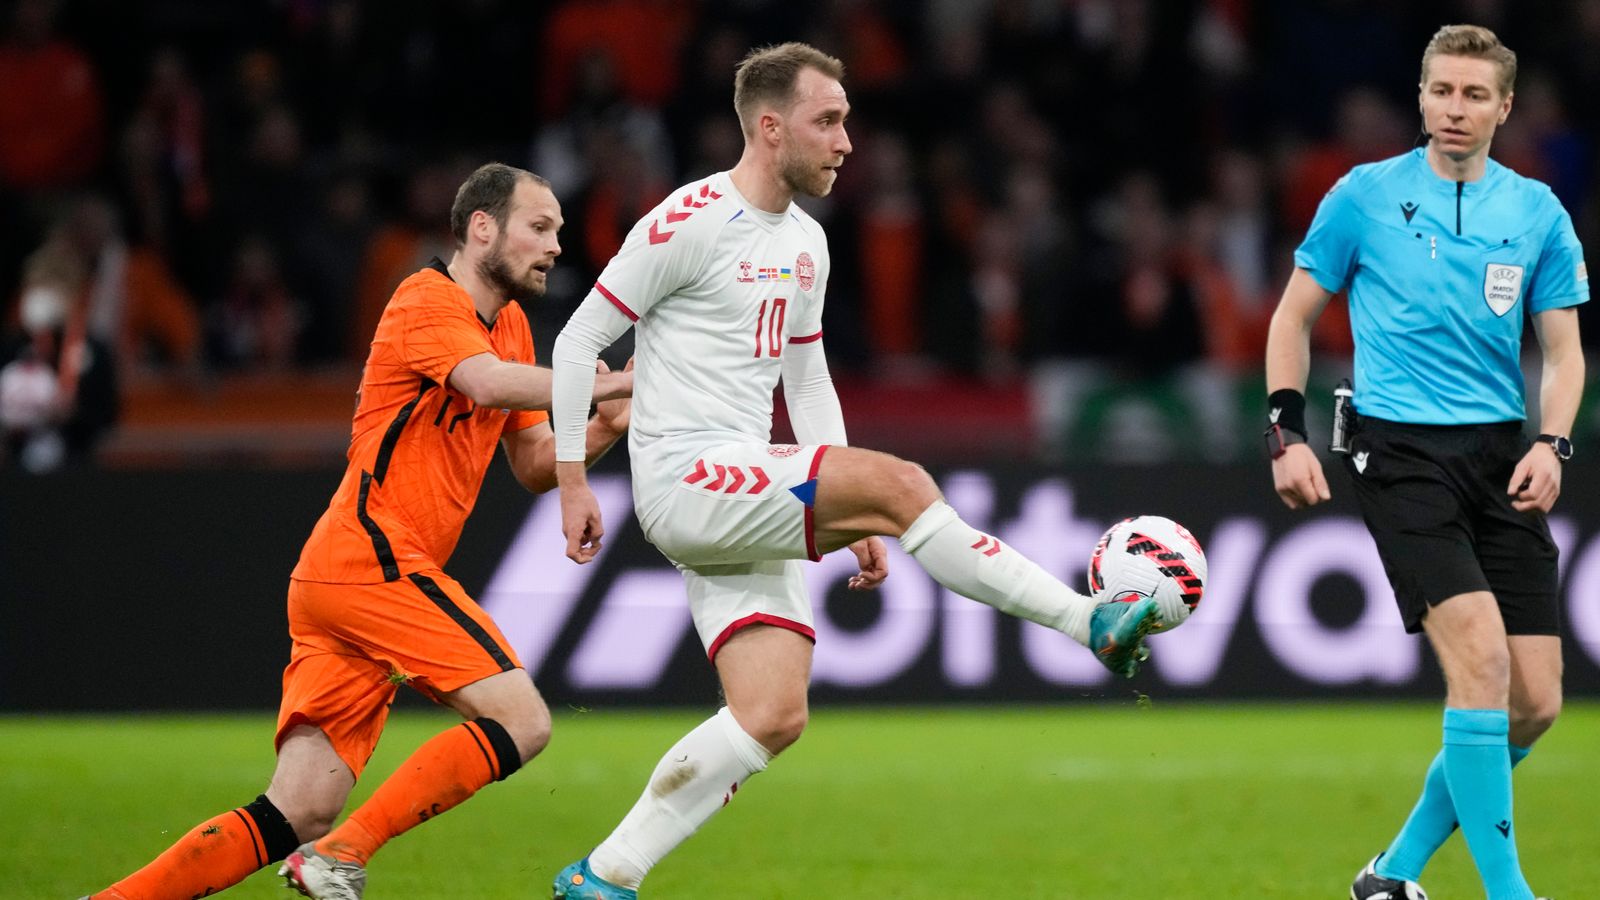 Christian Eriksen says his return goal is just a warm up for World Cup 2022